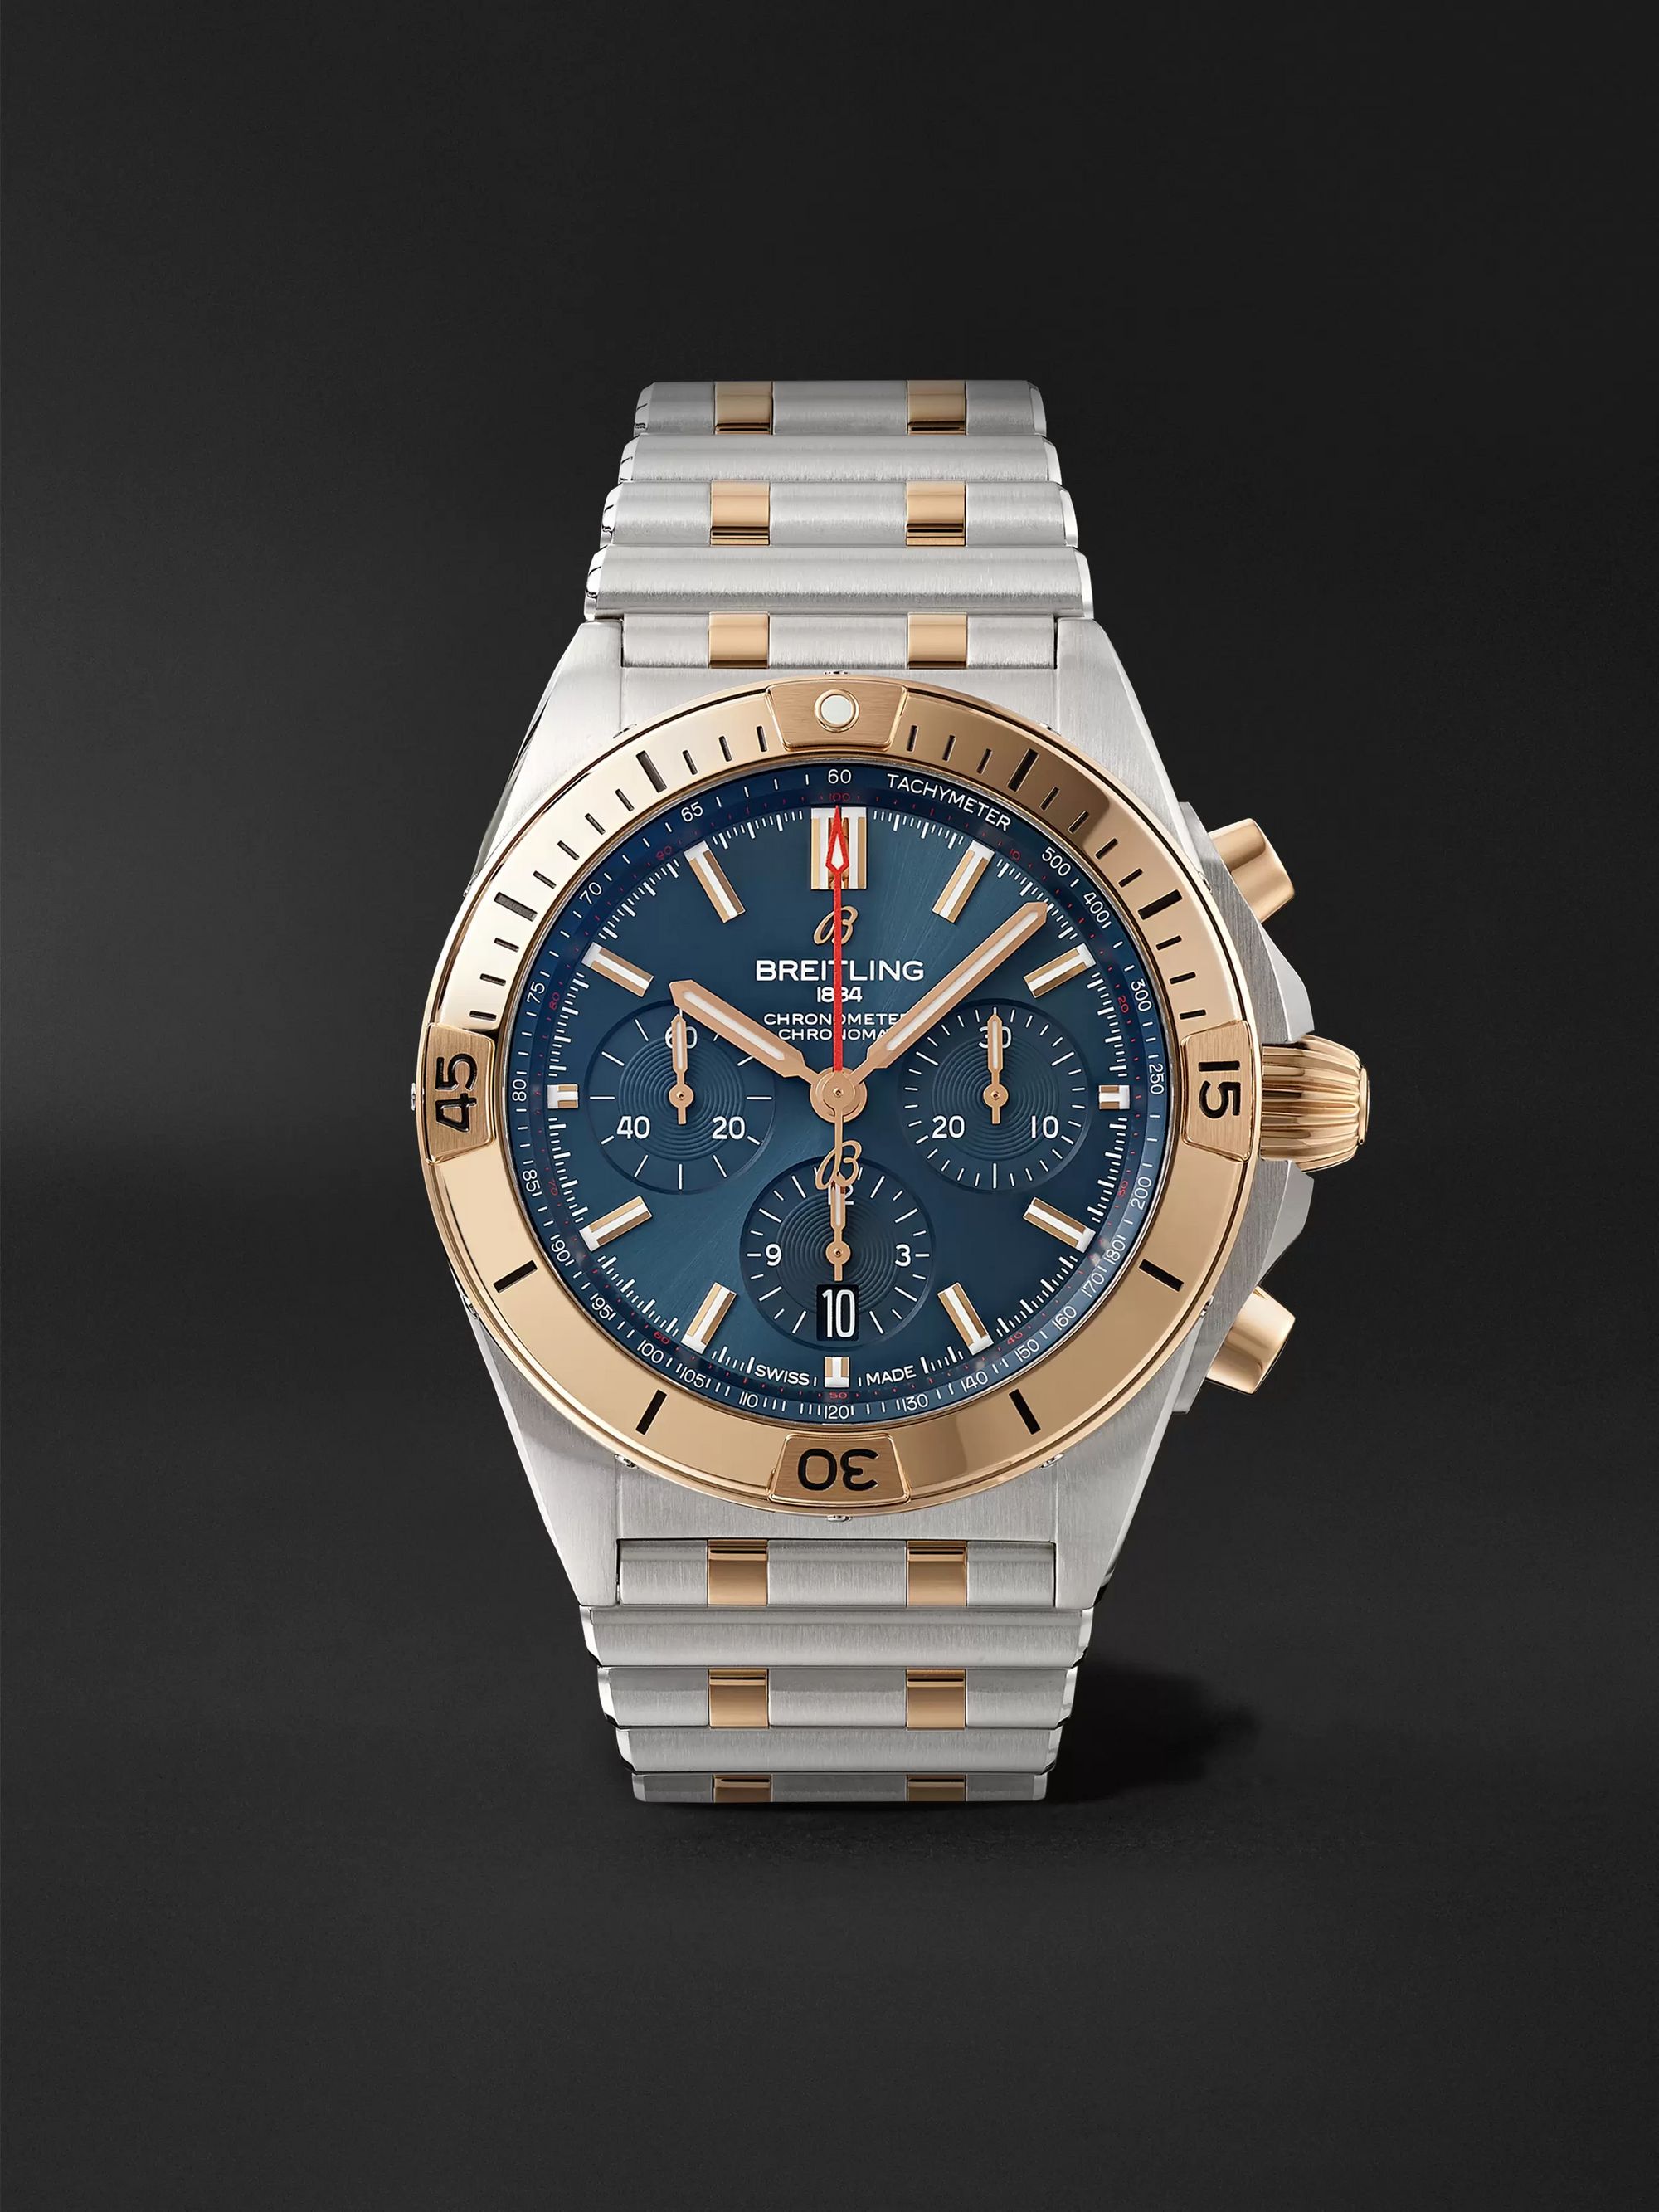 BREITLING Chronomat B01 Automatic Chronograph 42mm Stainless Steel and 18-Karat Red Gold Watch, Ref. No. UB0134101C1U1